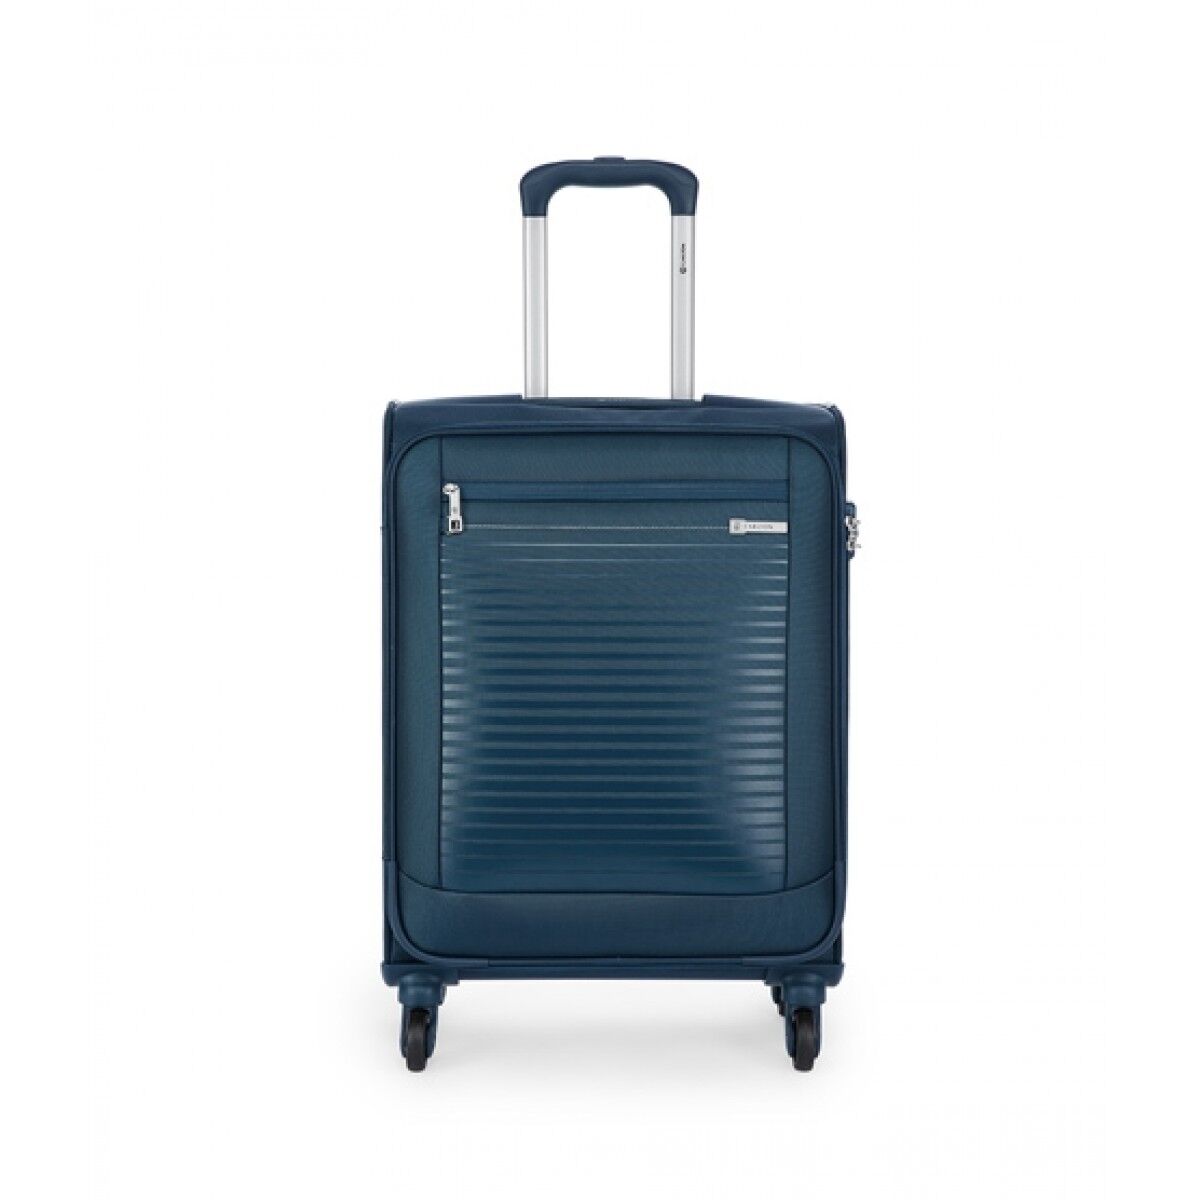 Carlton Wexford Expandable Spinner Soft Luggage Trolley Suitcase 57cm